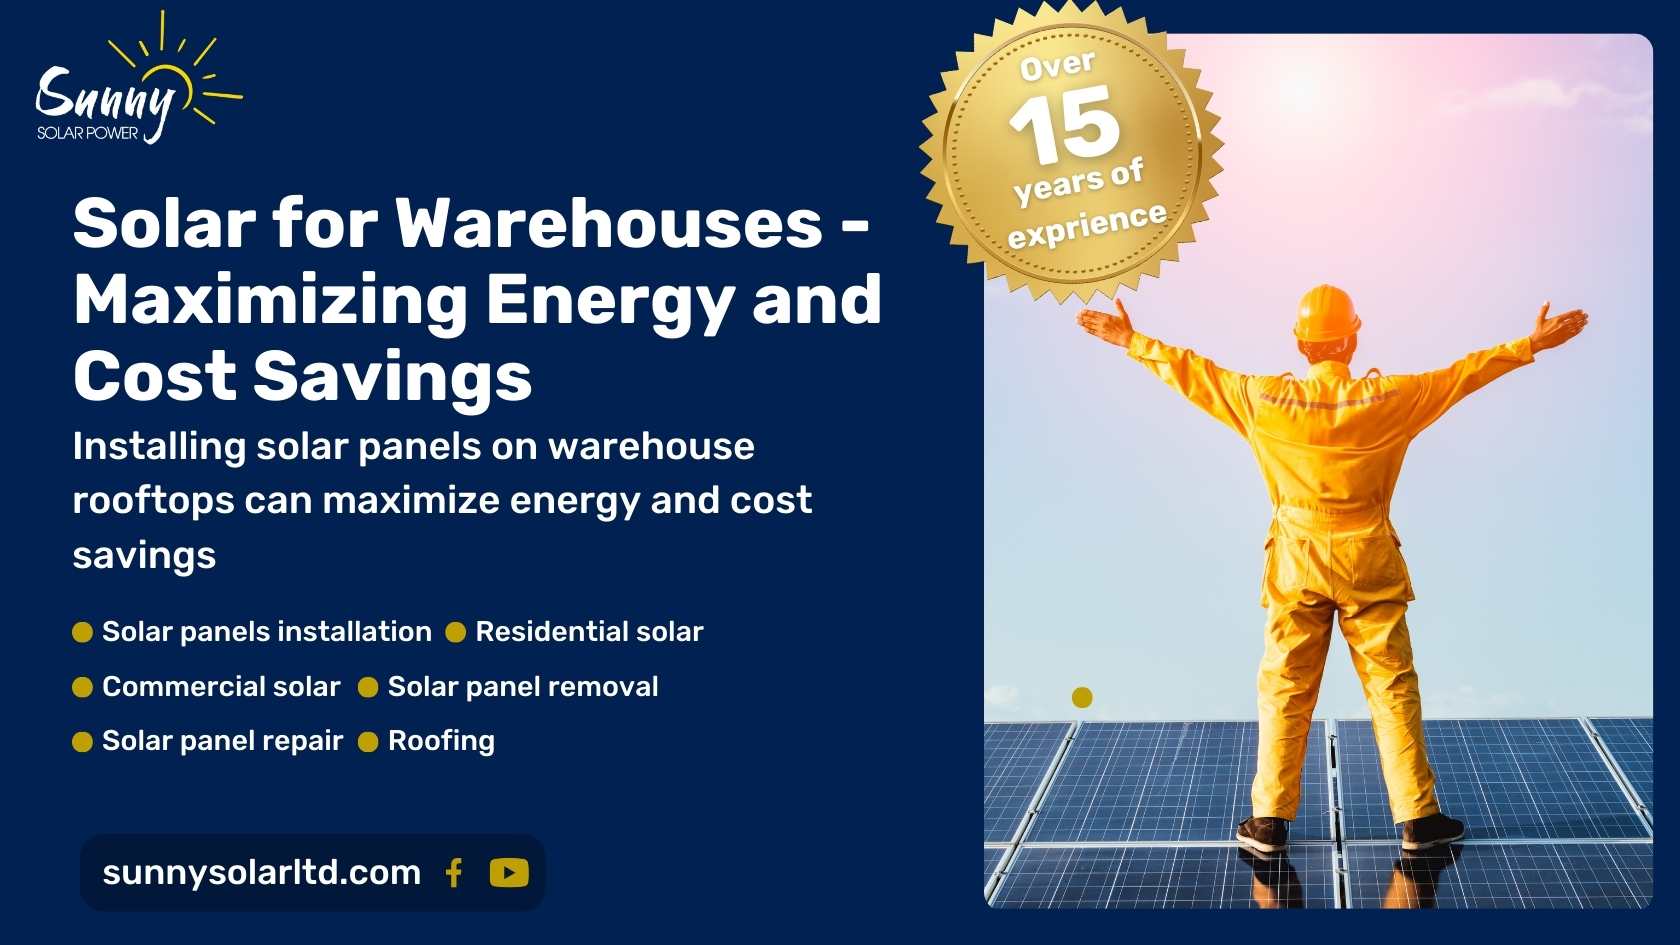 Installing solar panels on warehouse rooftops can maximize energy and cost savings - sunnysolar